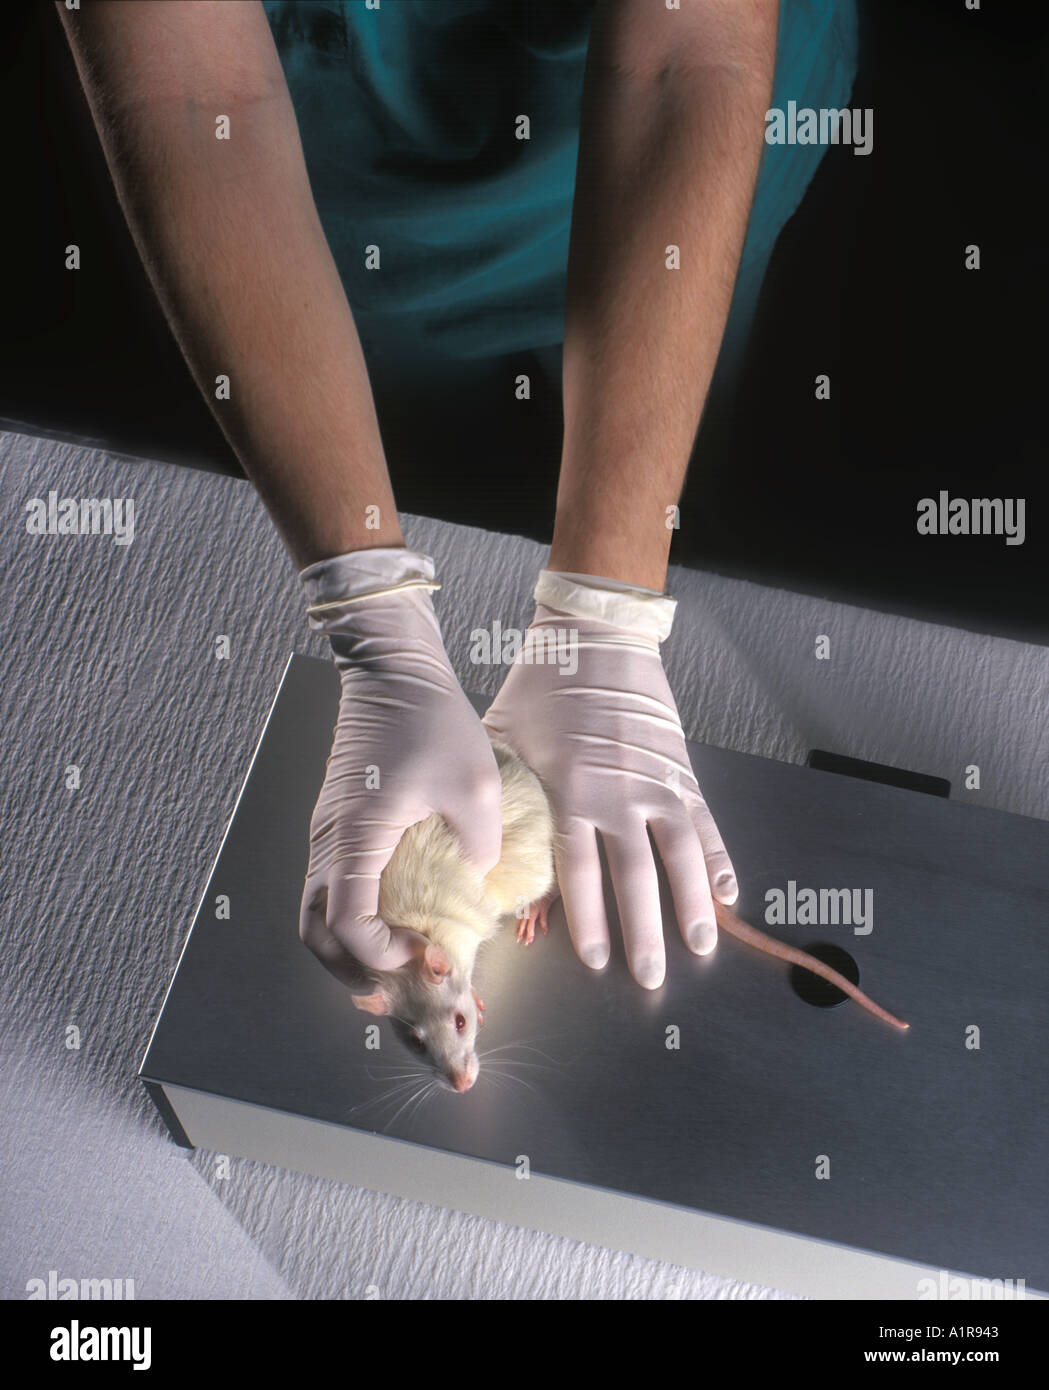 Lab Rat, Measuring Thickness Of Tail, Used In Animal Testing, USA Stock Photo